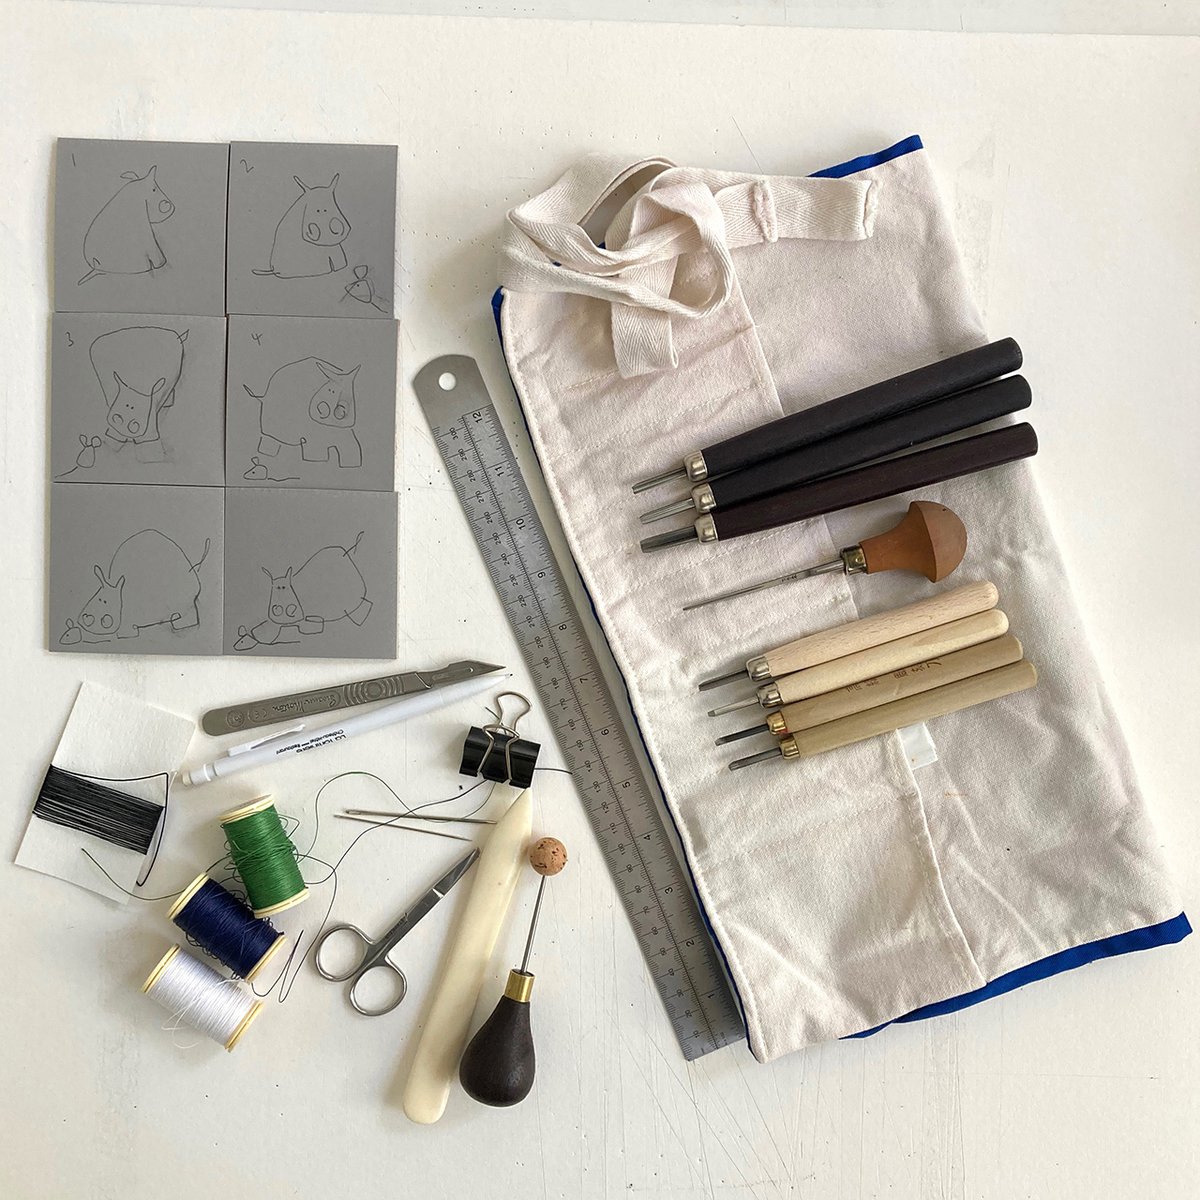 LAST CALL FINAL DAYS TO ENROL Classes starting next week @morleycollege IMAGE 1: Contemporary Calligraphy - Monday Afternoon IMAGE 2: Creative Bookbinding – Thursday Afternoon